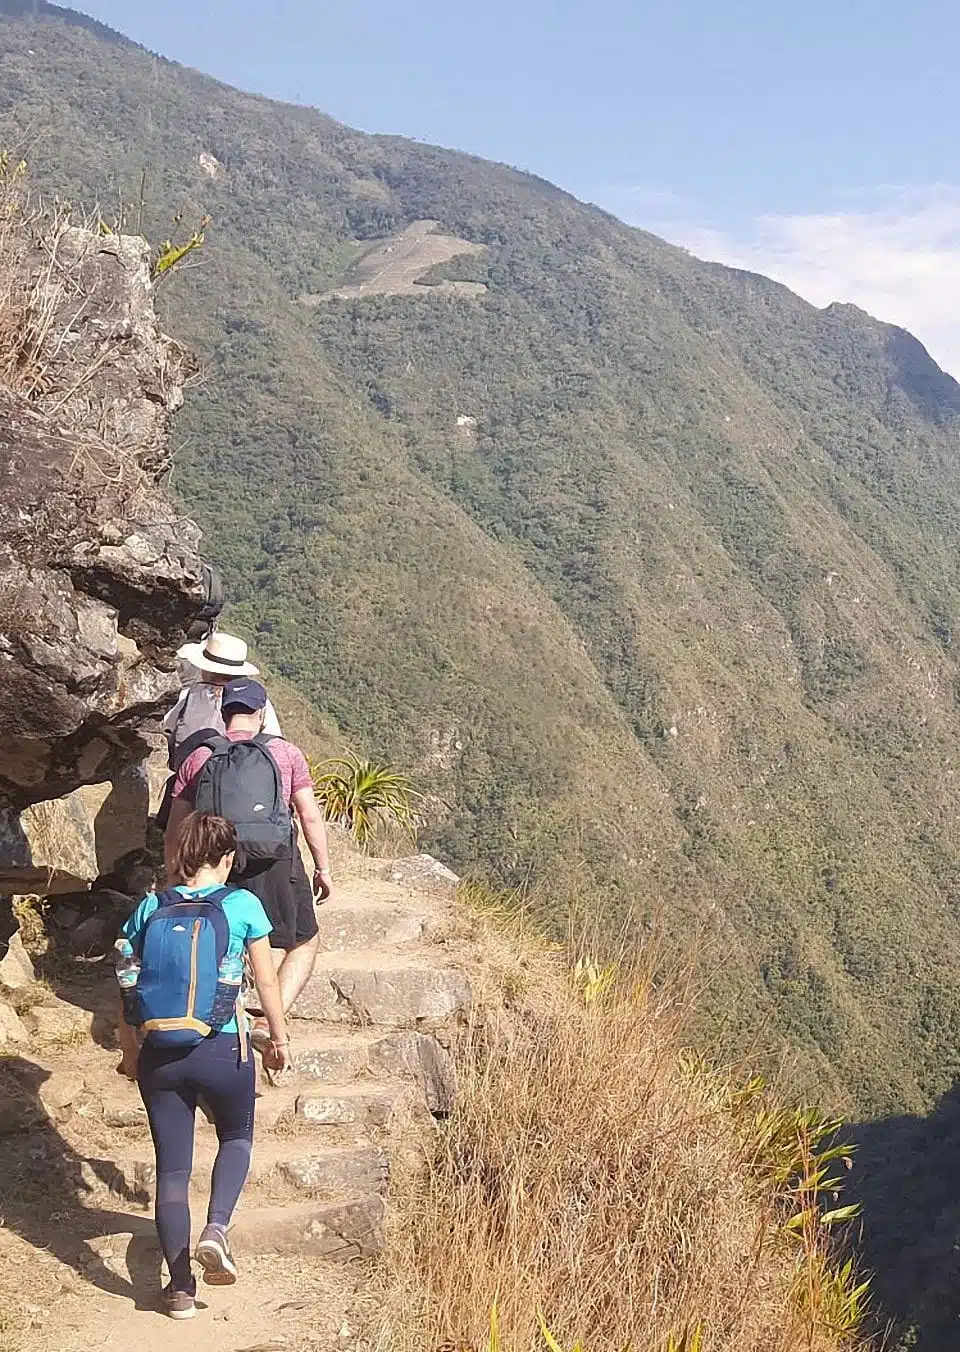 Fertur Peru Travel client on the final morning hiking the Inca Trail about to arrive to Machu Picchu